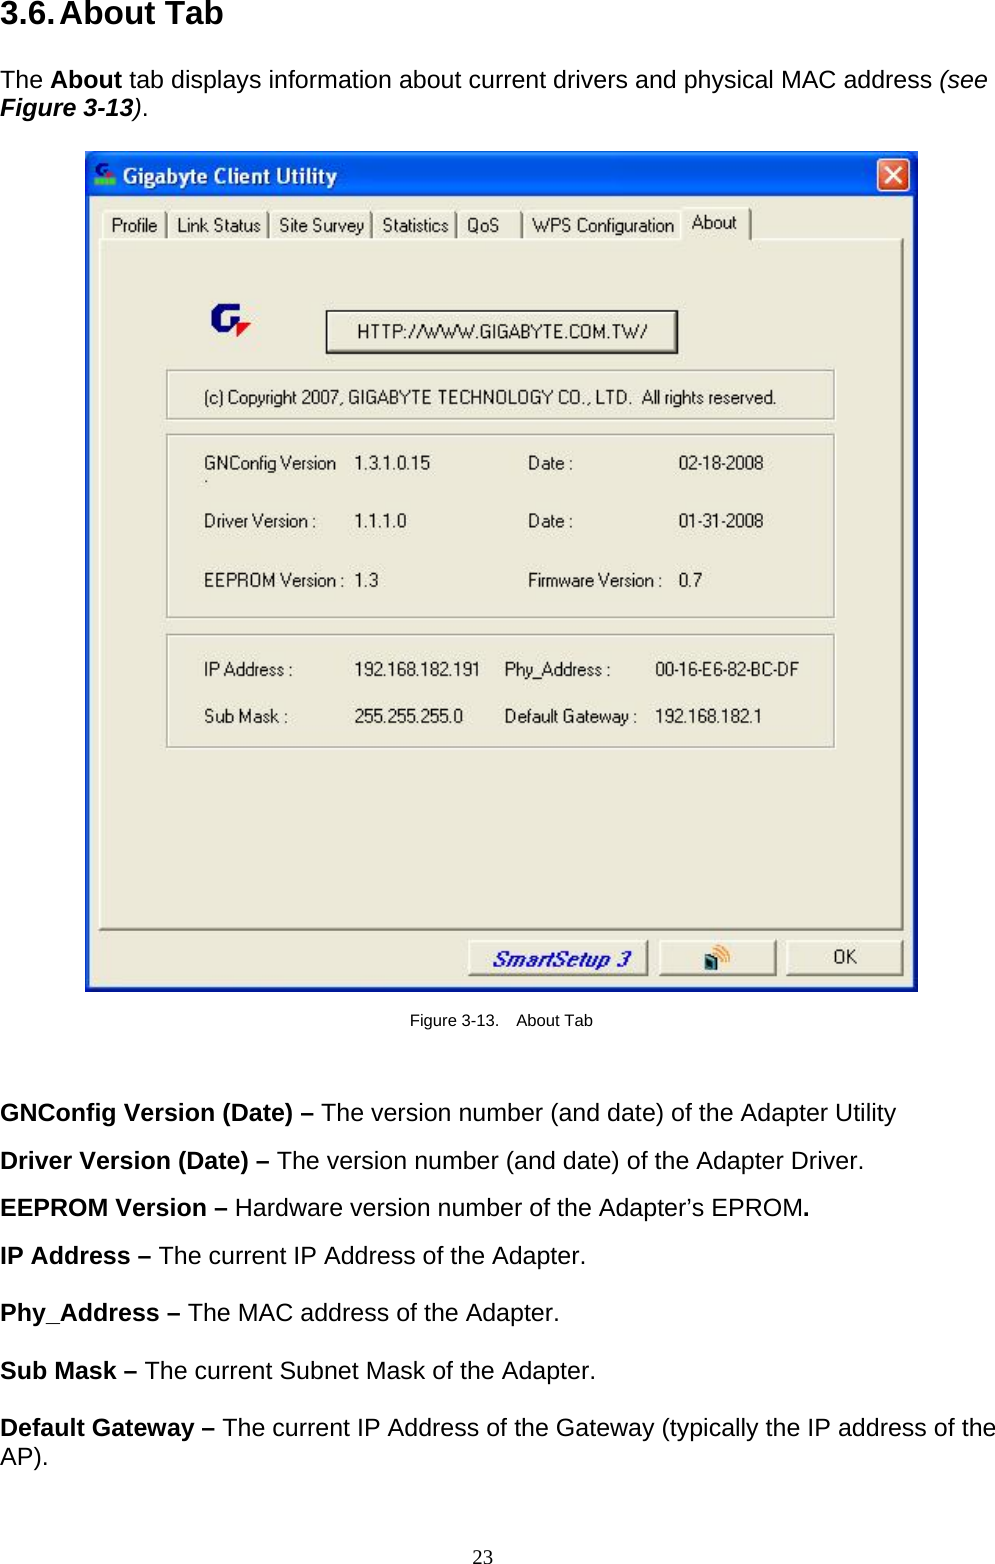 3.6. About  Tab  The About tab displays information about current drivers and physical MAC address (see Figure 3-13).    Figure 3-13.  About Tab  GNConfig Version (Date) – The version number (and date) of the Adapter Utility  Driver Version (Date) – The version number (and date) of the Adapter Driver.  EEPROM Version – Hardware version number of the Adapter’s EPROM.  IP Address – The current IP Address of the Adapter.  Phy_Address – The MAC address of the Adapter.  Sub Mask – The current Subnet Mask of the Adapter.  Default Gateway – The current IP Address of the Gateway (typically the IP address of the AP). 23   